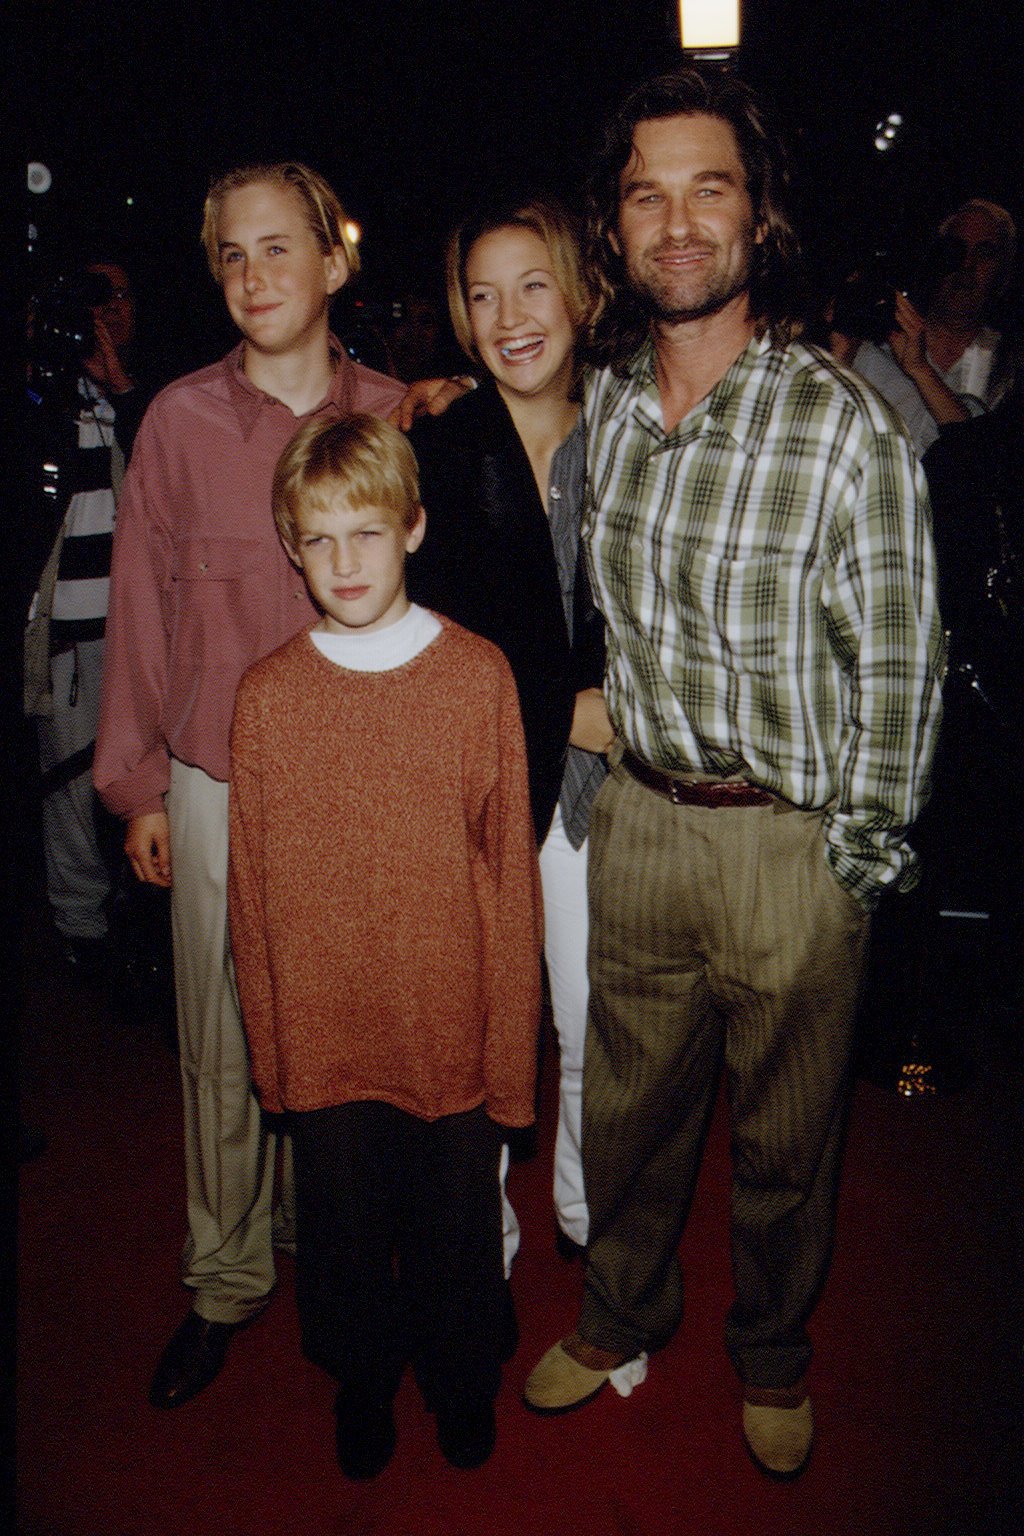 Boston Russell, Kate Hudson, Kurt Russell, and Wyatt Russell at the premiere of "Executive Decision" on March 11, 1996 | Source: Getty Images